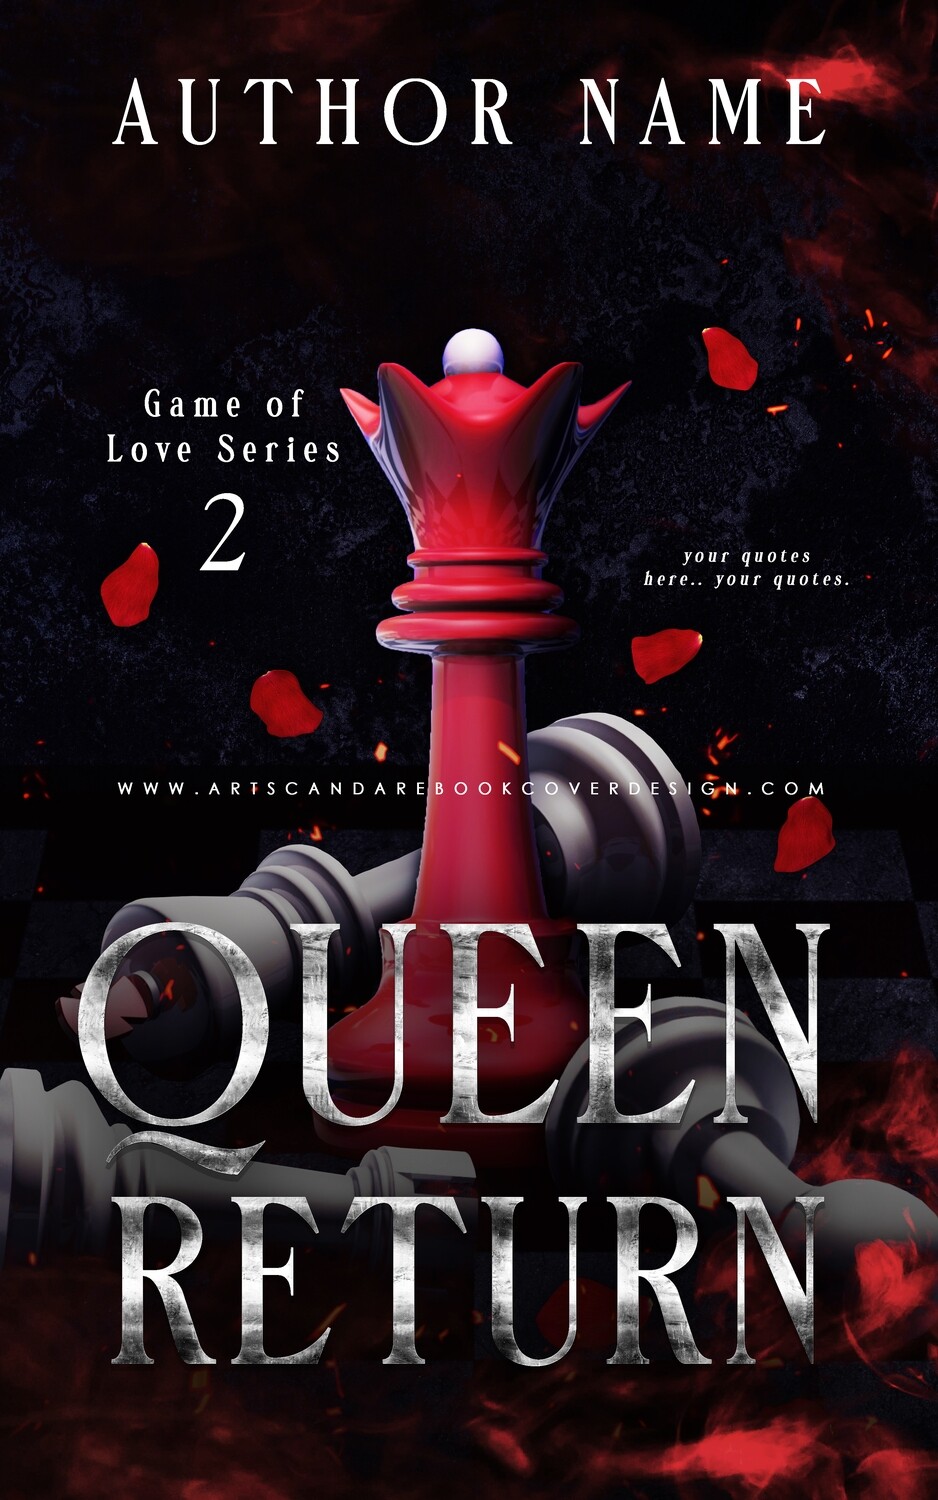 Ebook: Game of Love Series DUOLOGY